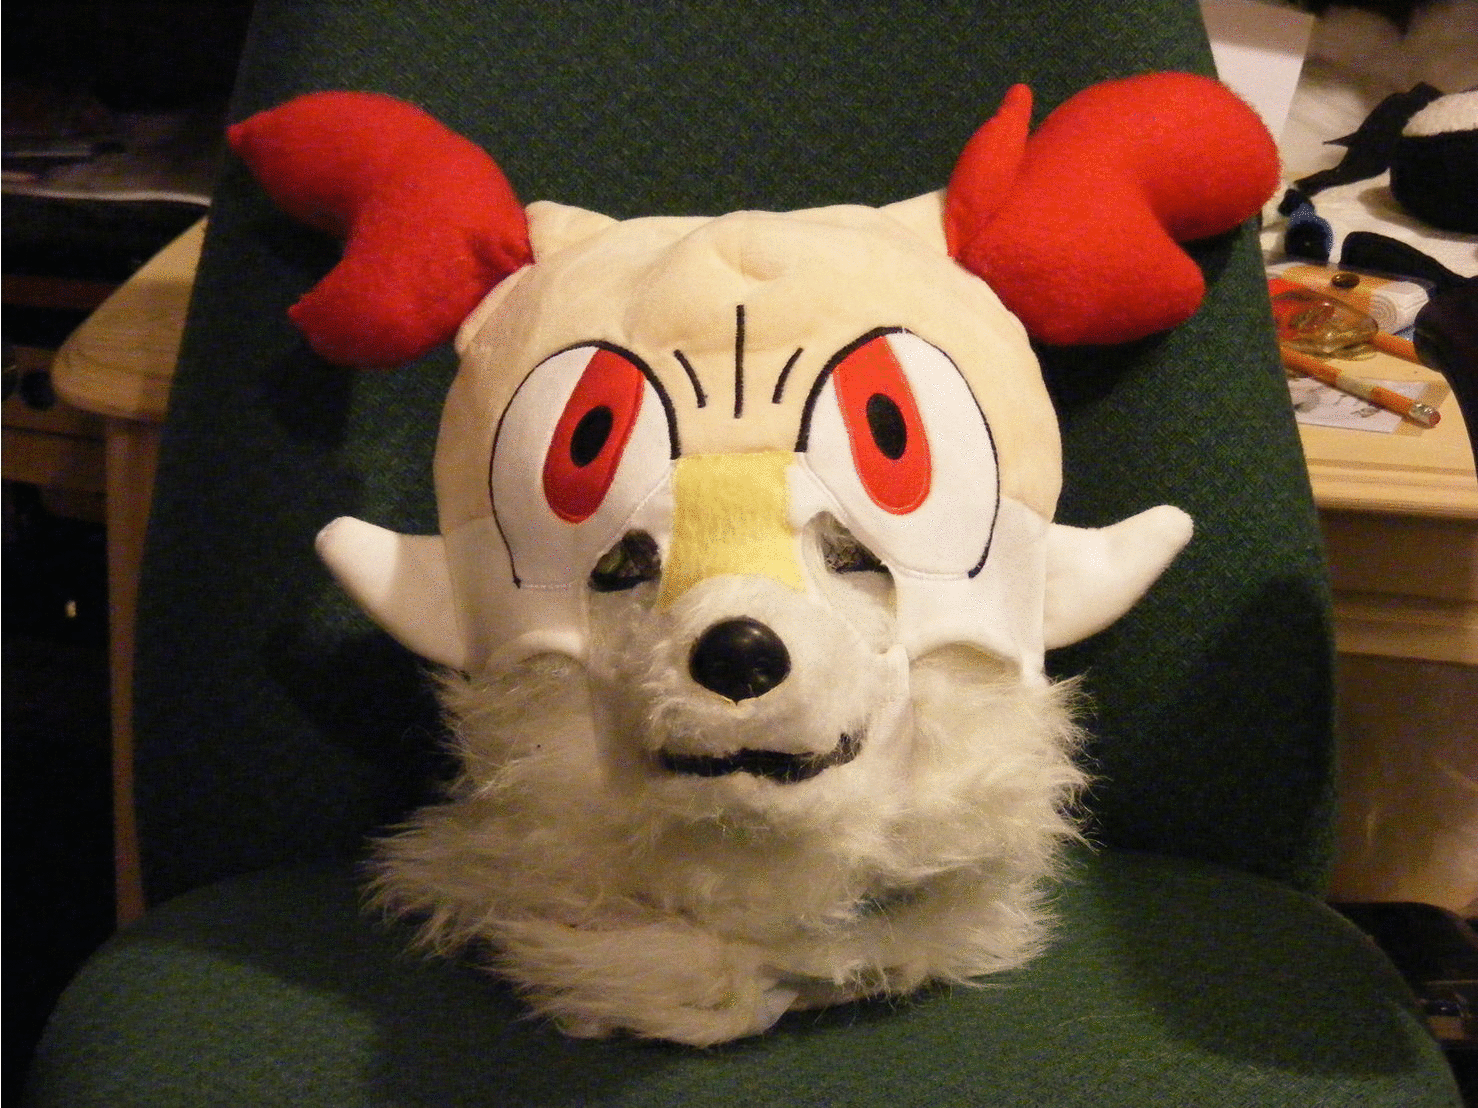 What Does the WIP Braixen Fursuit Head Say? 